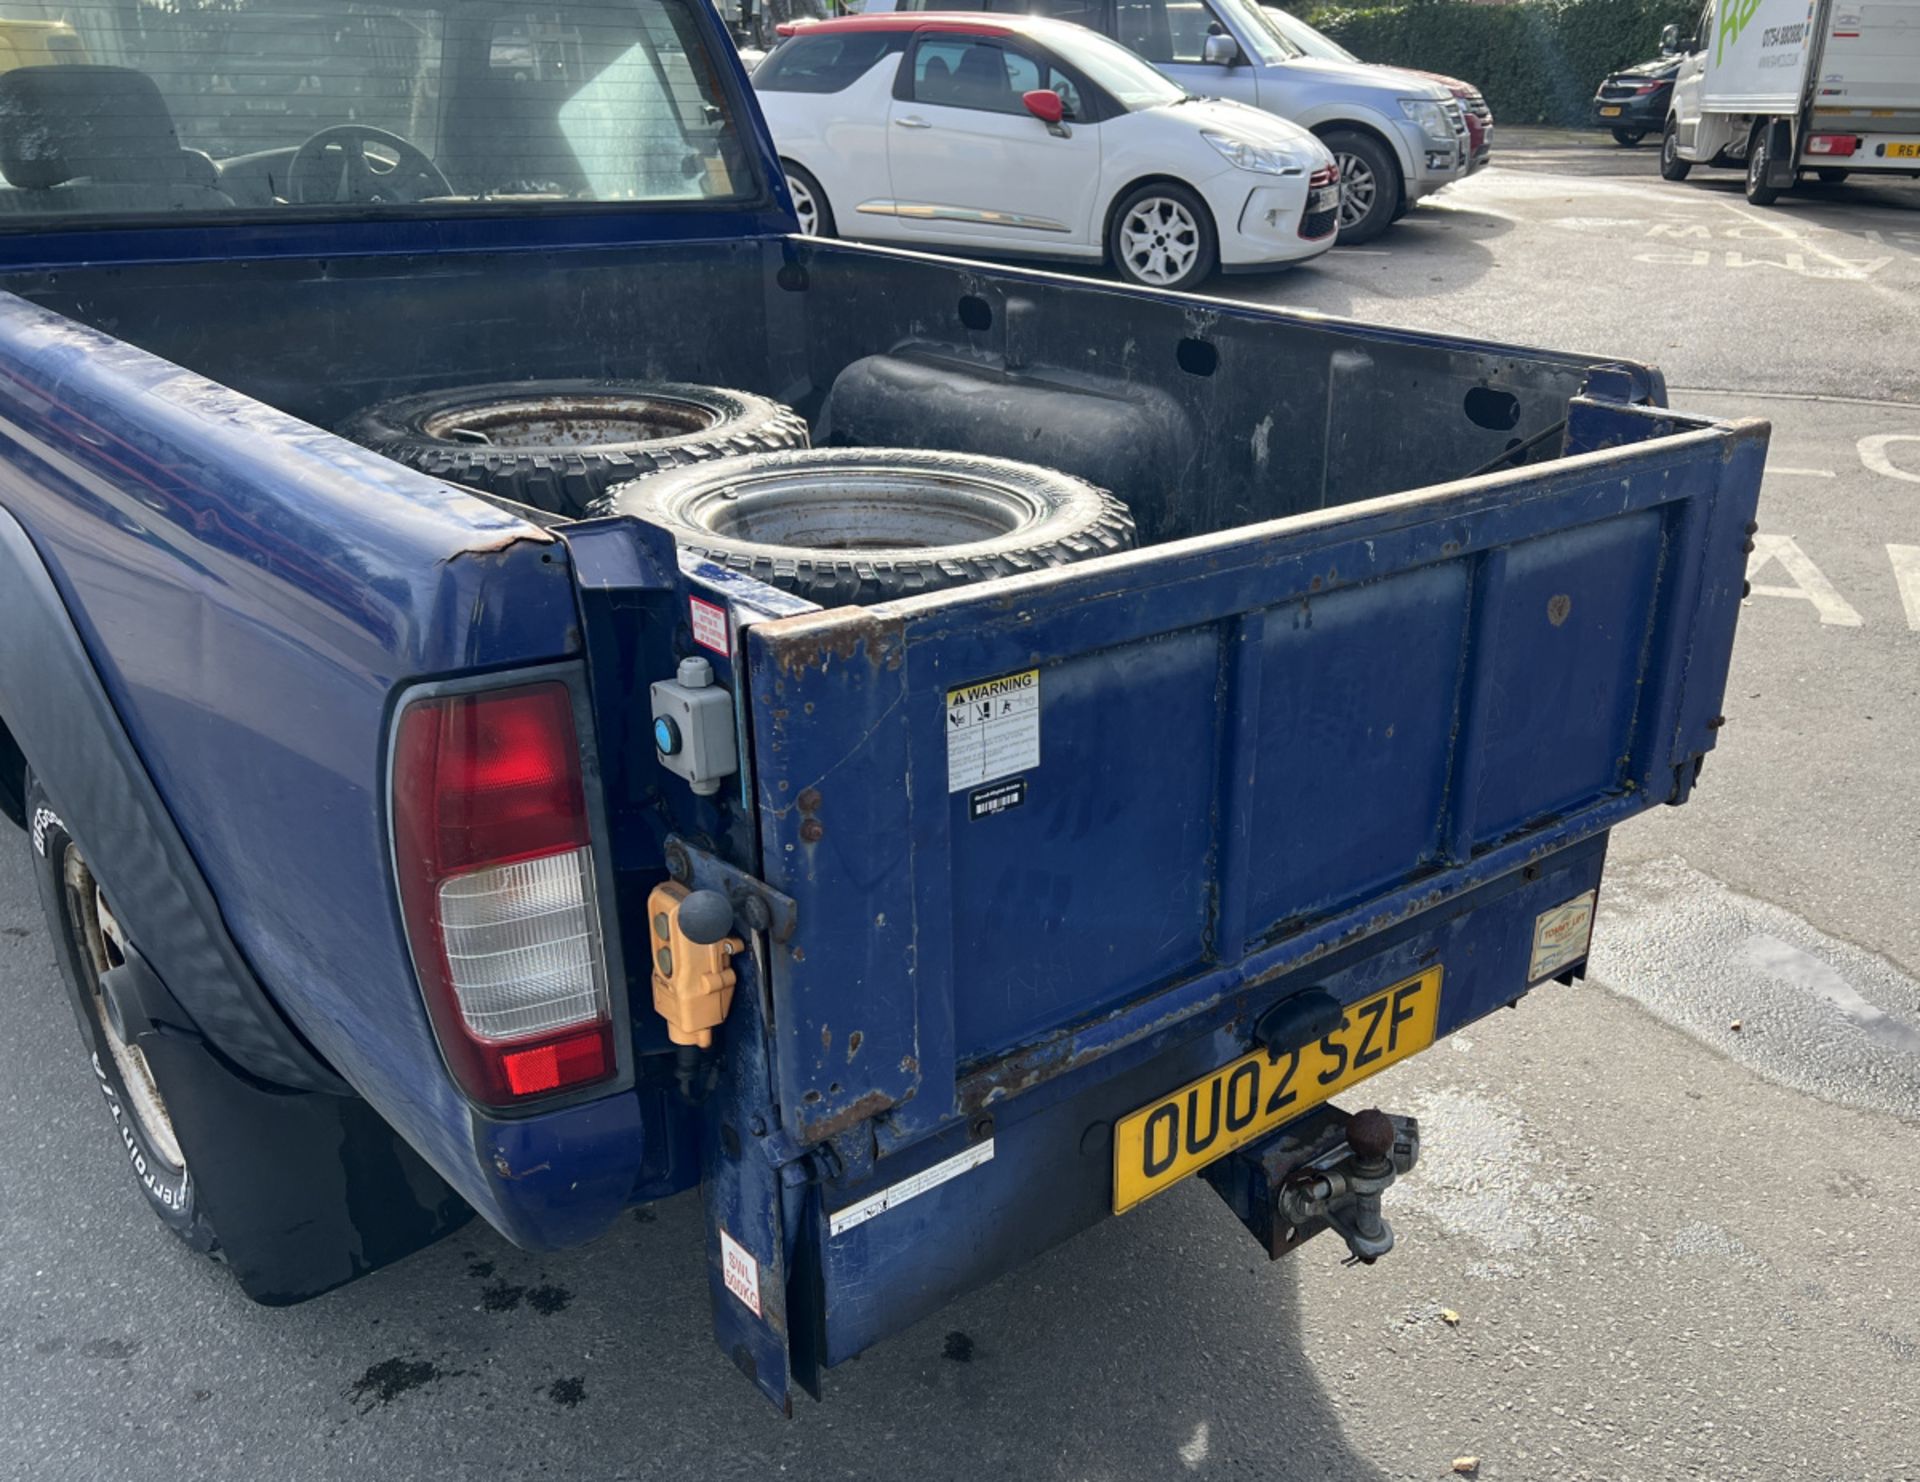 Nissan D22 Pickup with Tommy lift tail lift - 2002 - 2.5L - MOT EXPIRED PLEASE SEE DESC. - Image 32 of 37